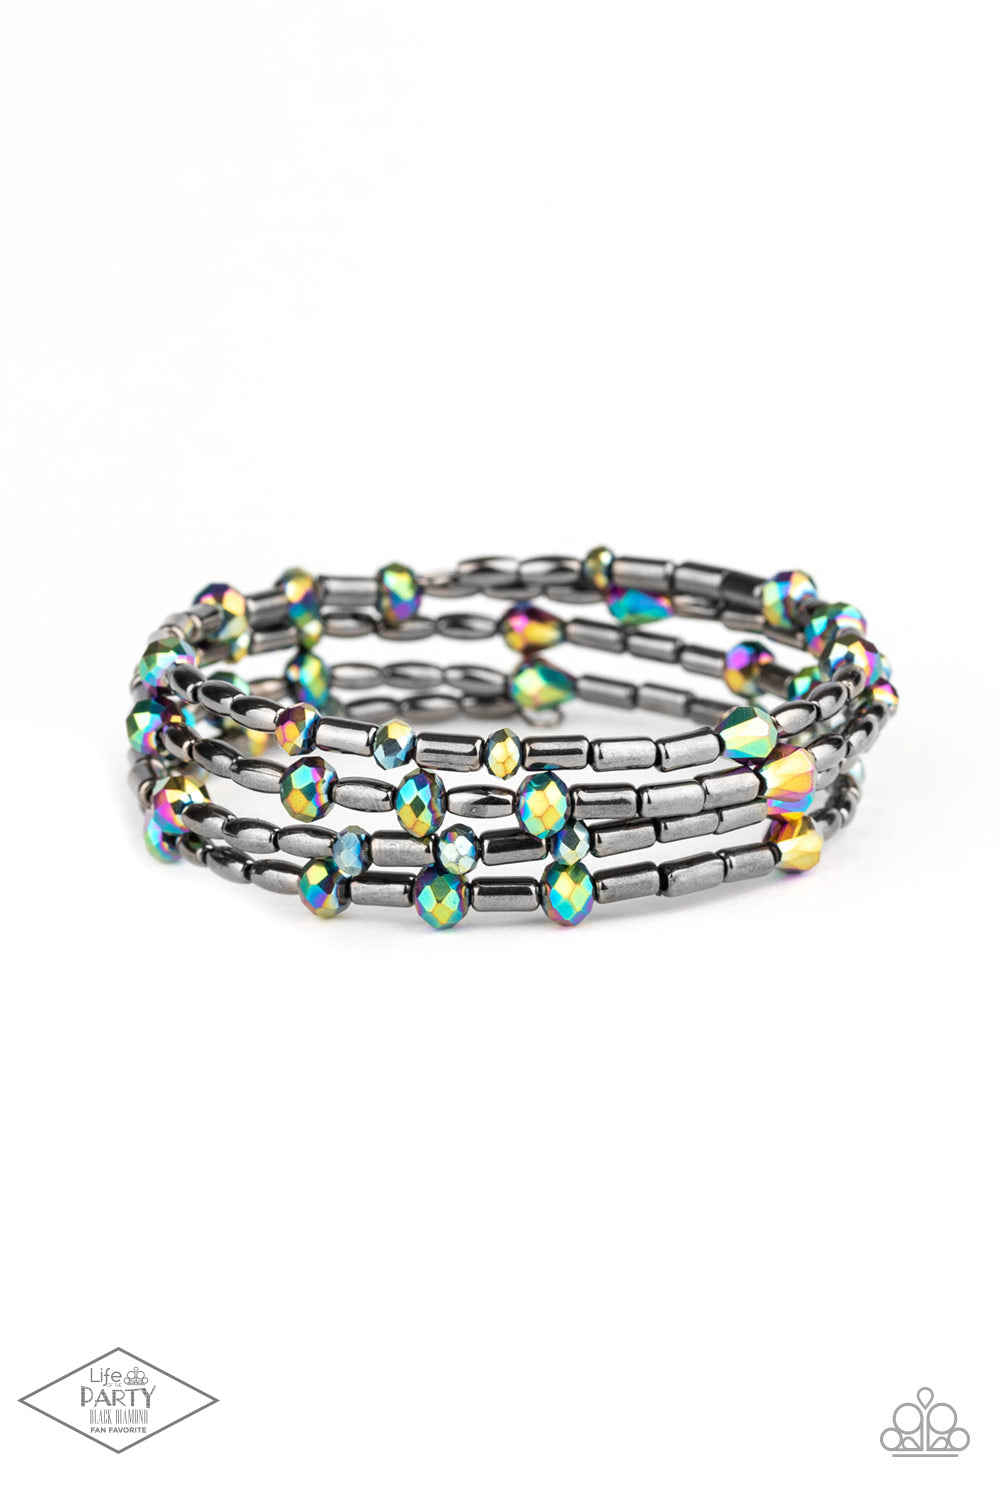 Varying in size and shape, iridescent gems and glistening gunmetal beads are threaded along a coiled wire, creating a regal infinity wrap style bracelet around the wrist.